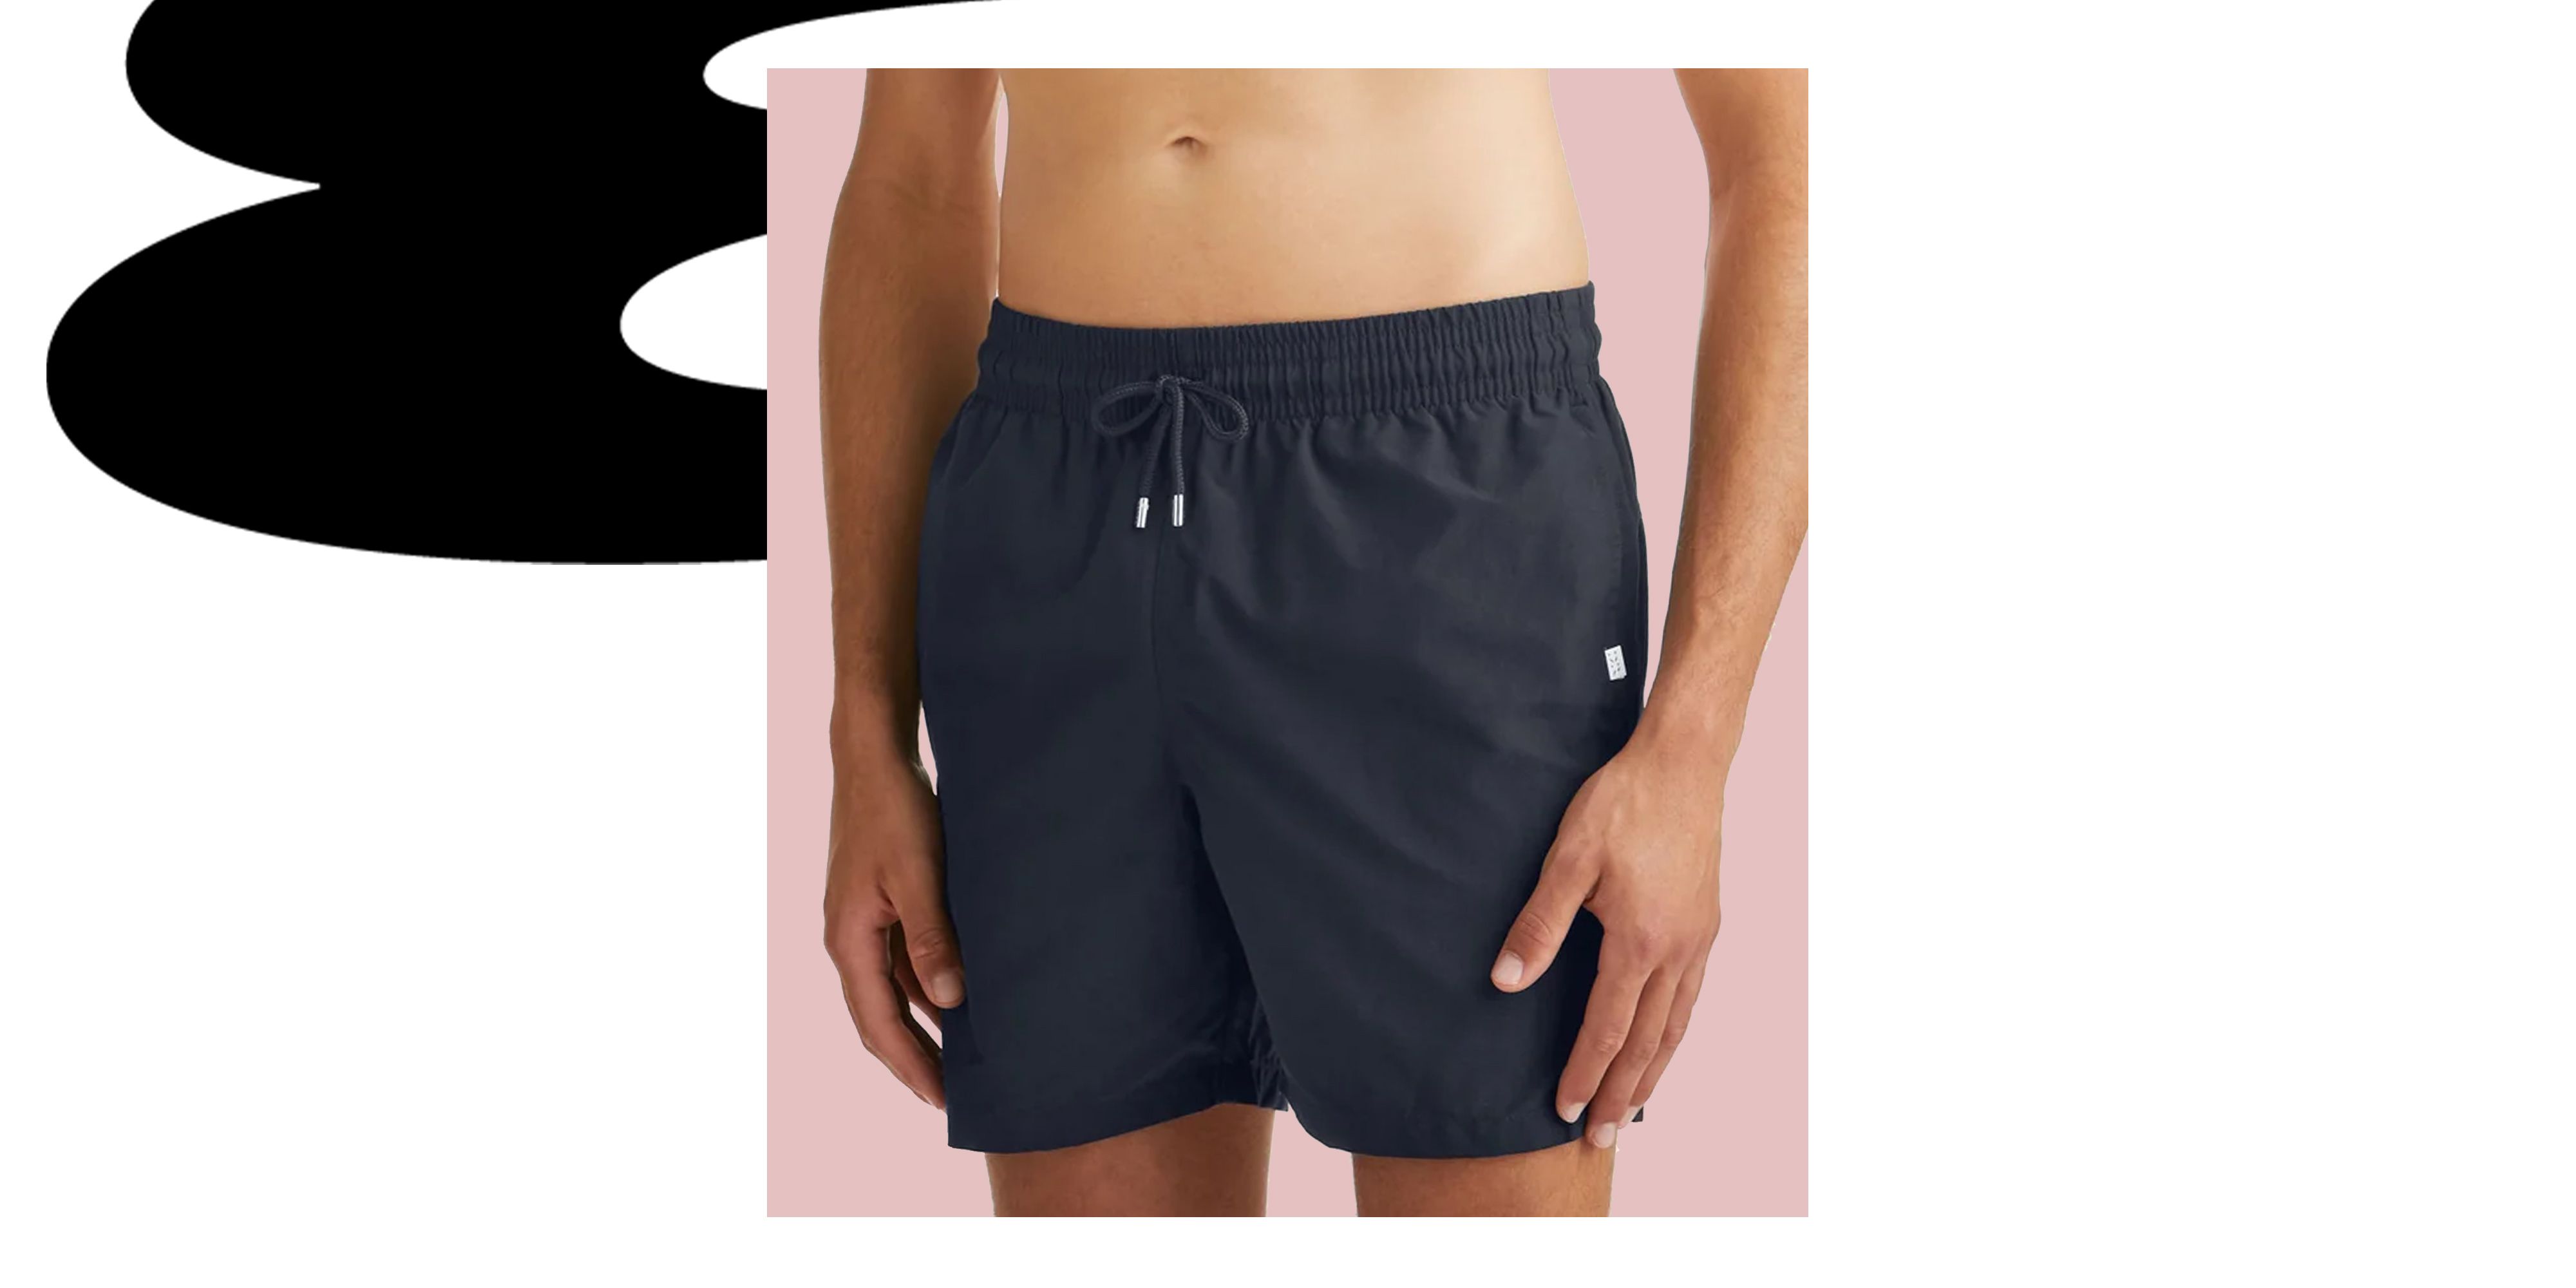 Should Men Wear Shorts? - Can Men Get Away With Shorts in the Workplace?